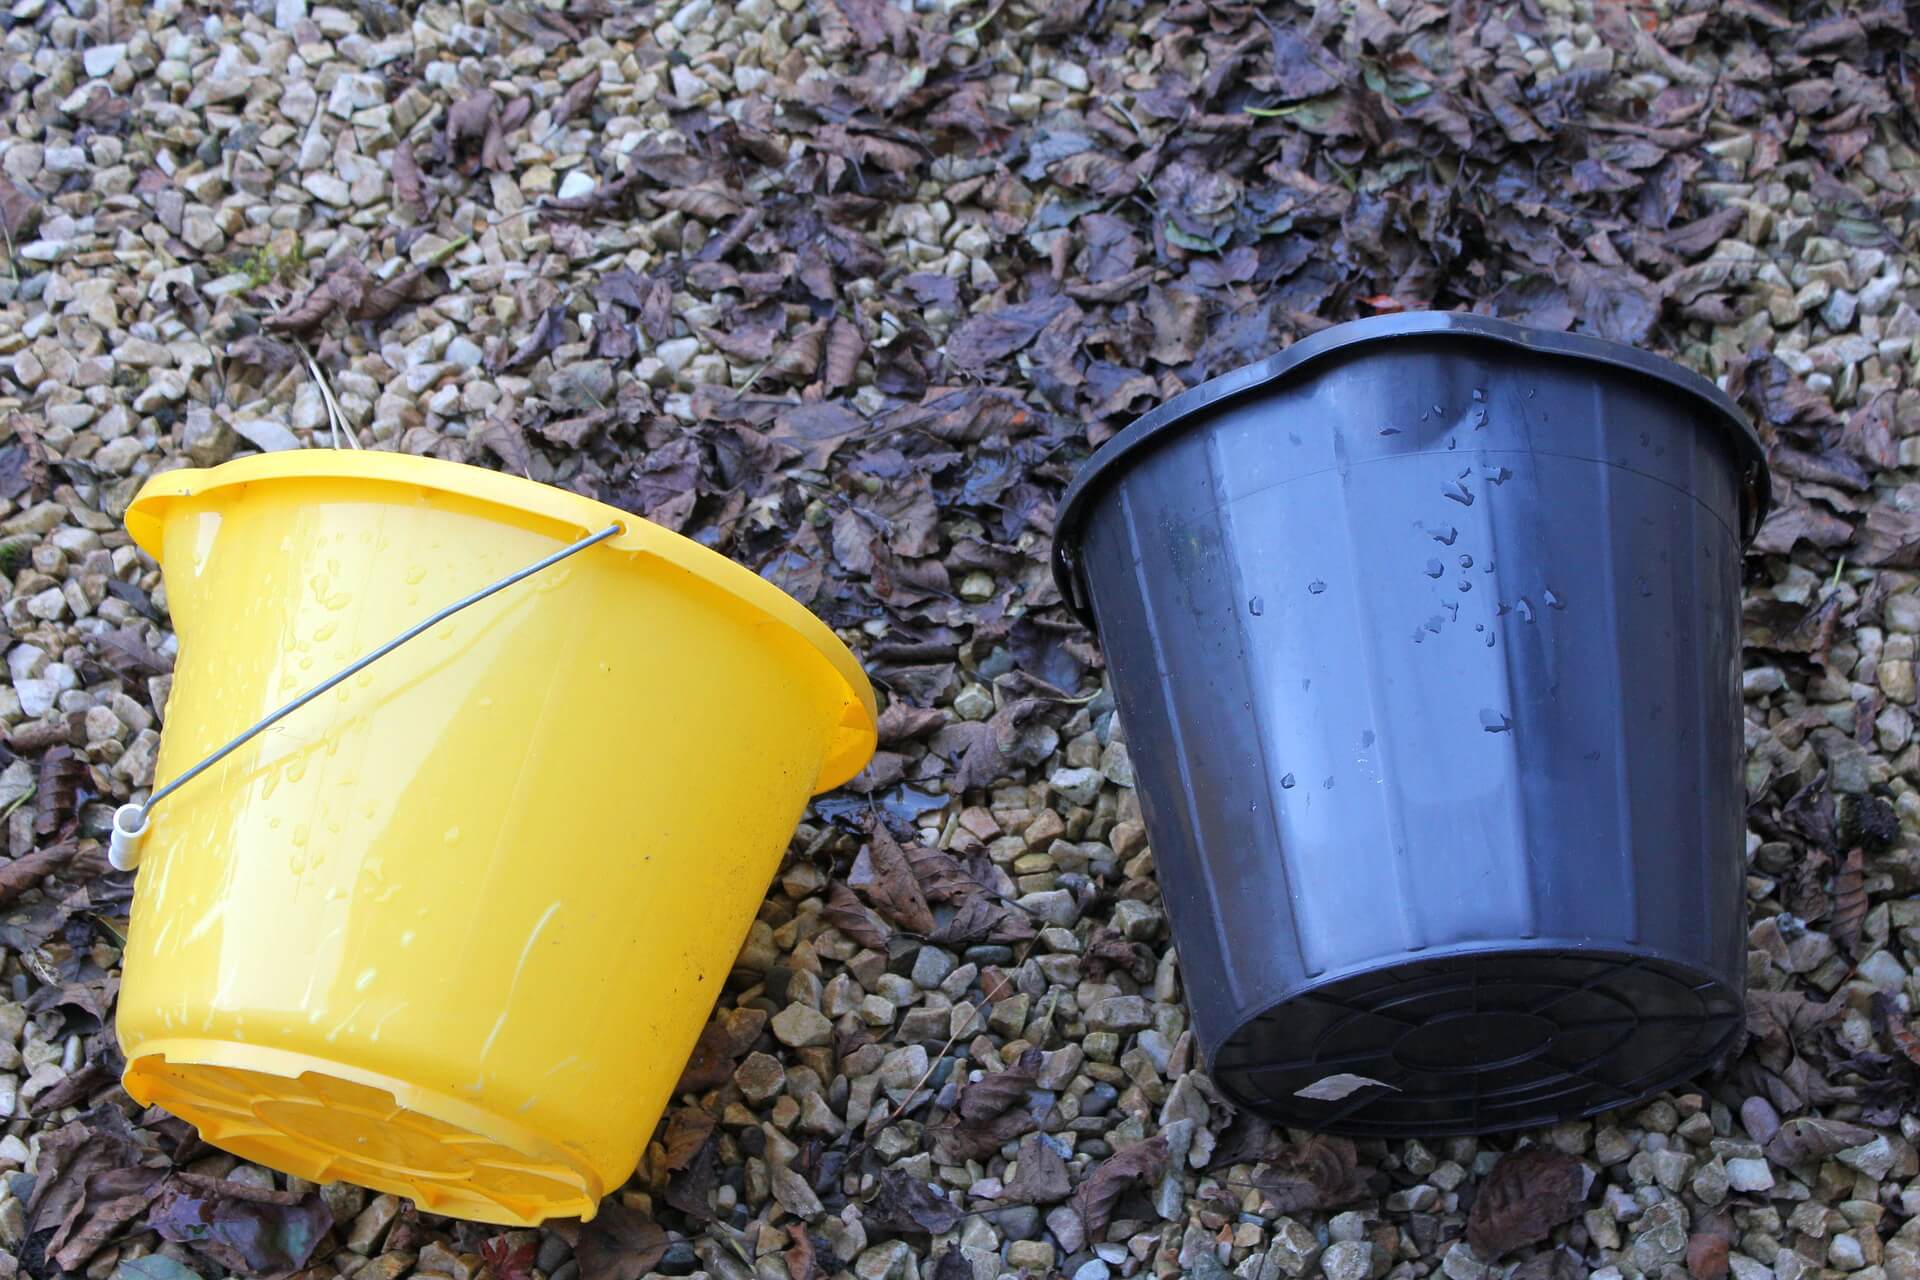 An image of two buckets, side by side.